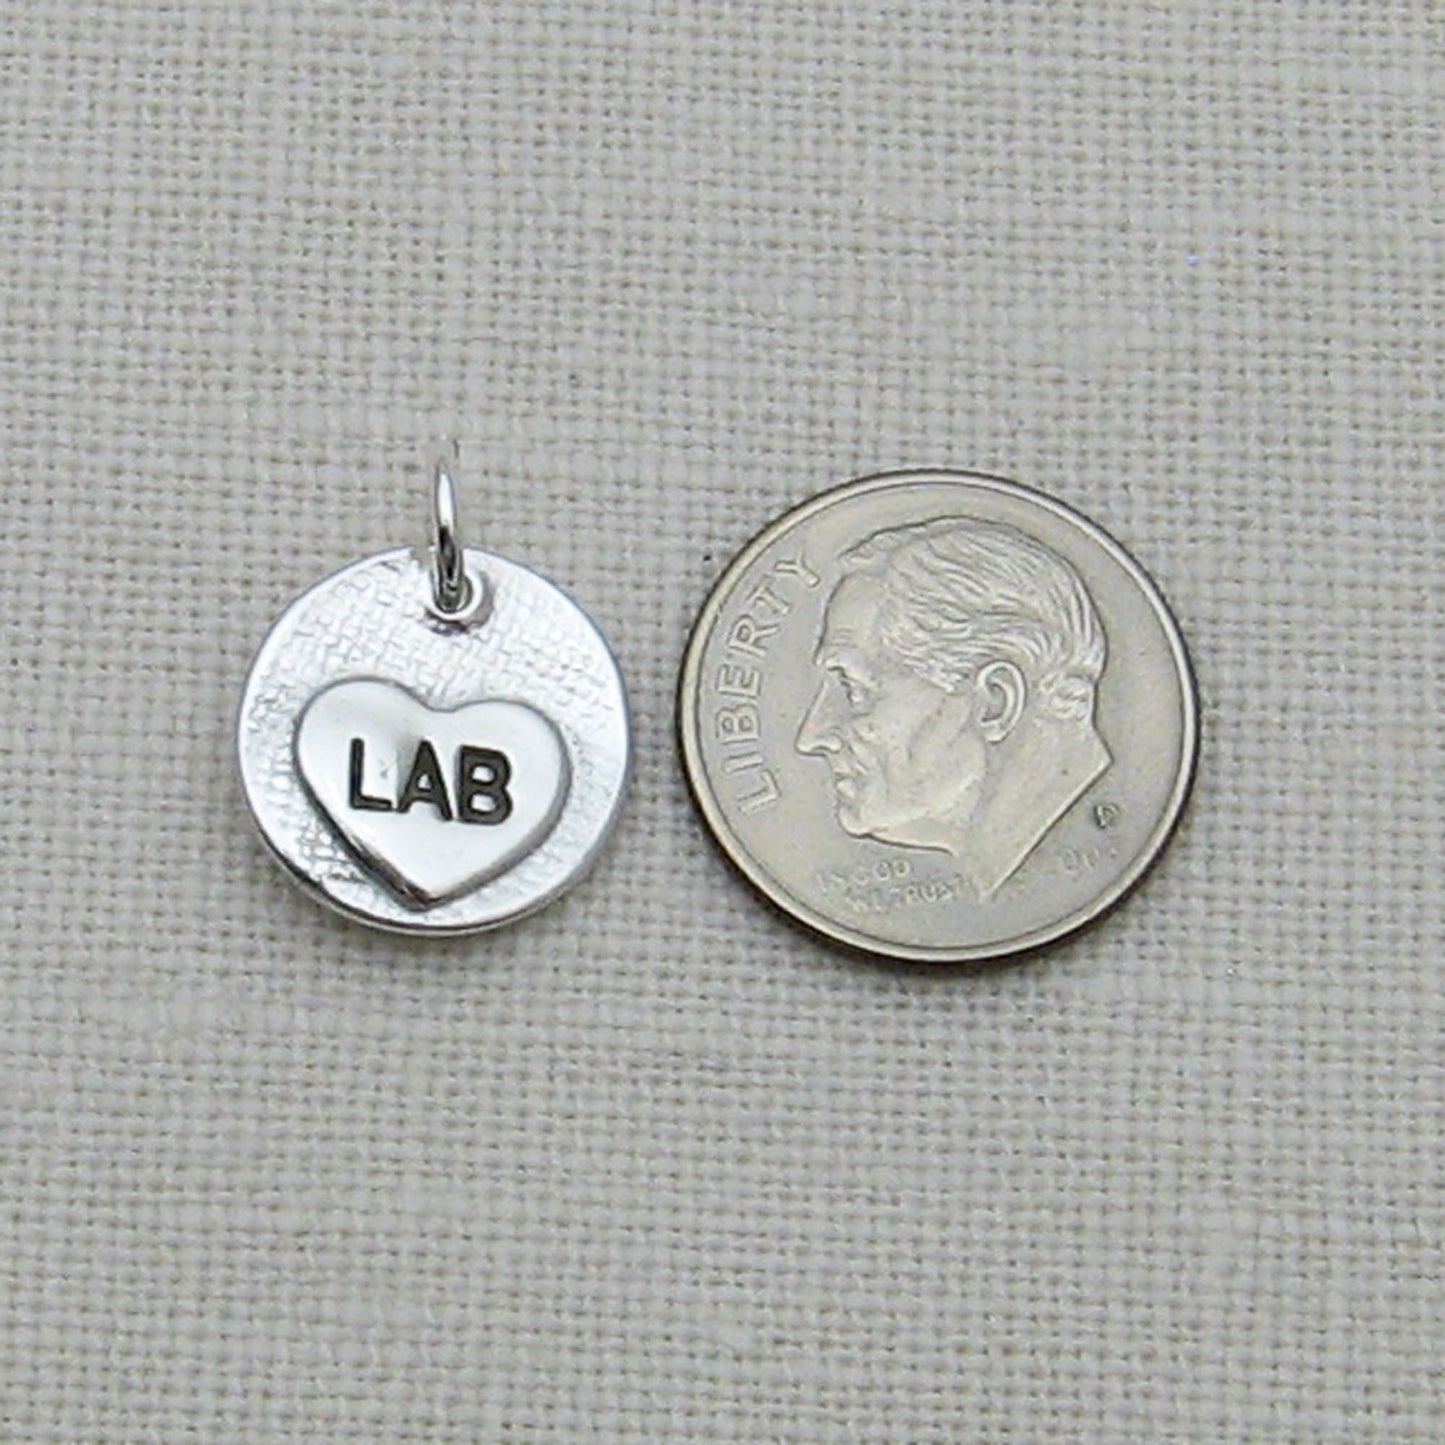 Back of Circle Pendant showing Small engraved heart next to dime for size reference